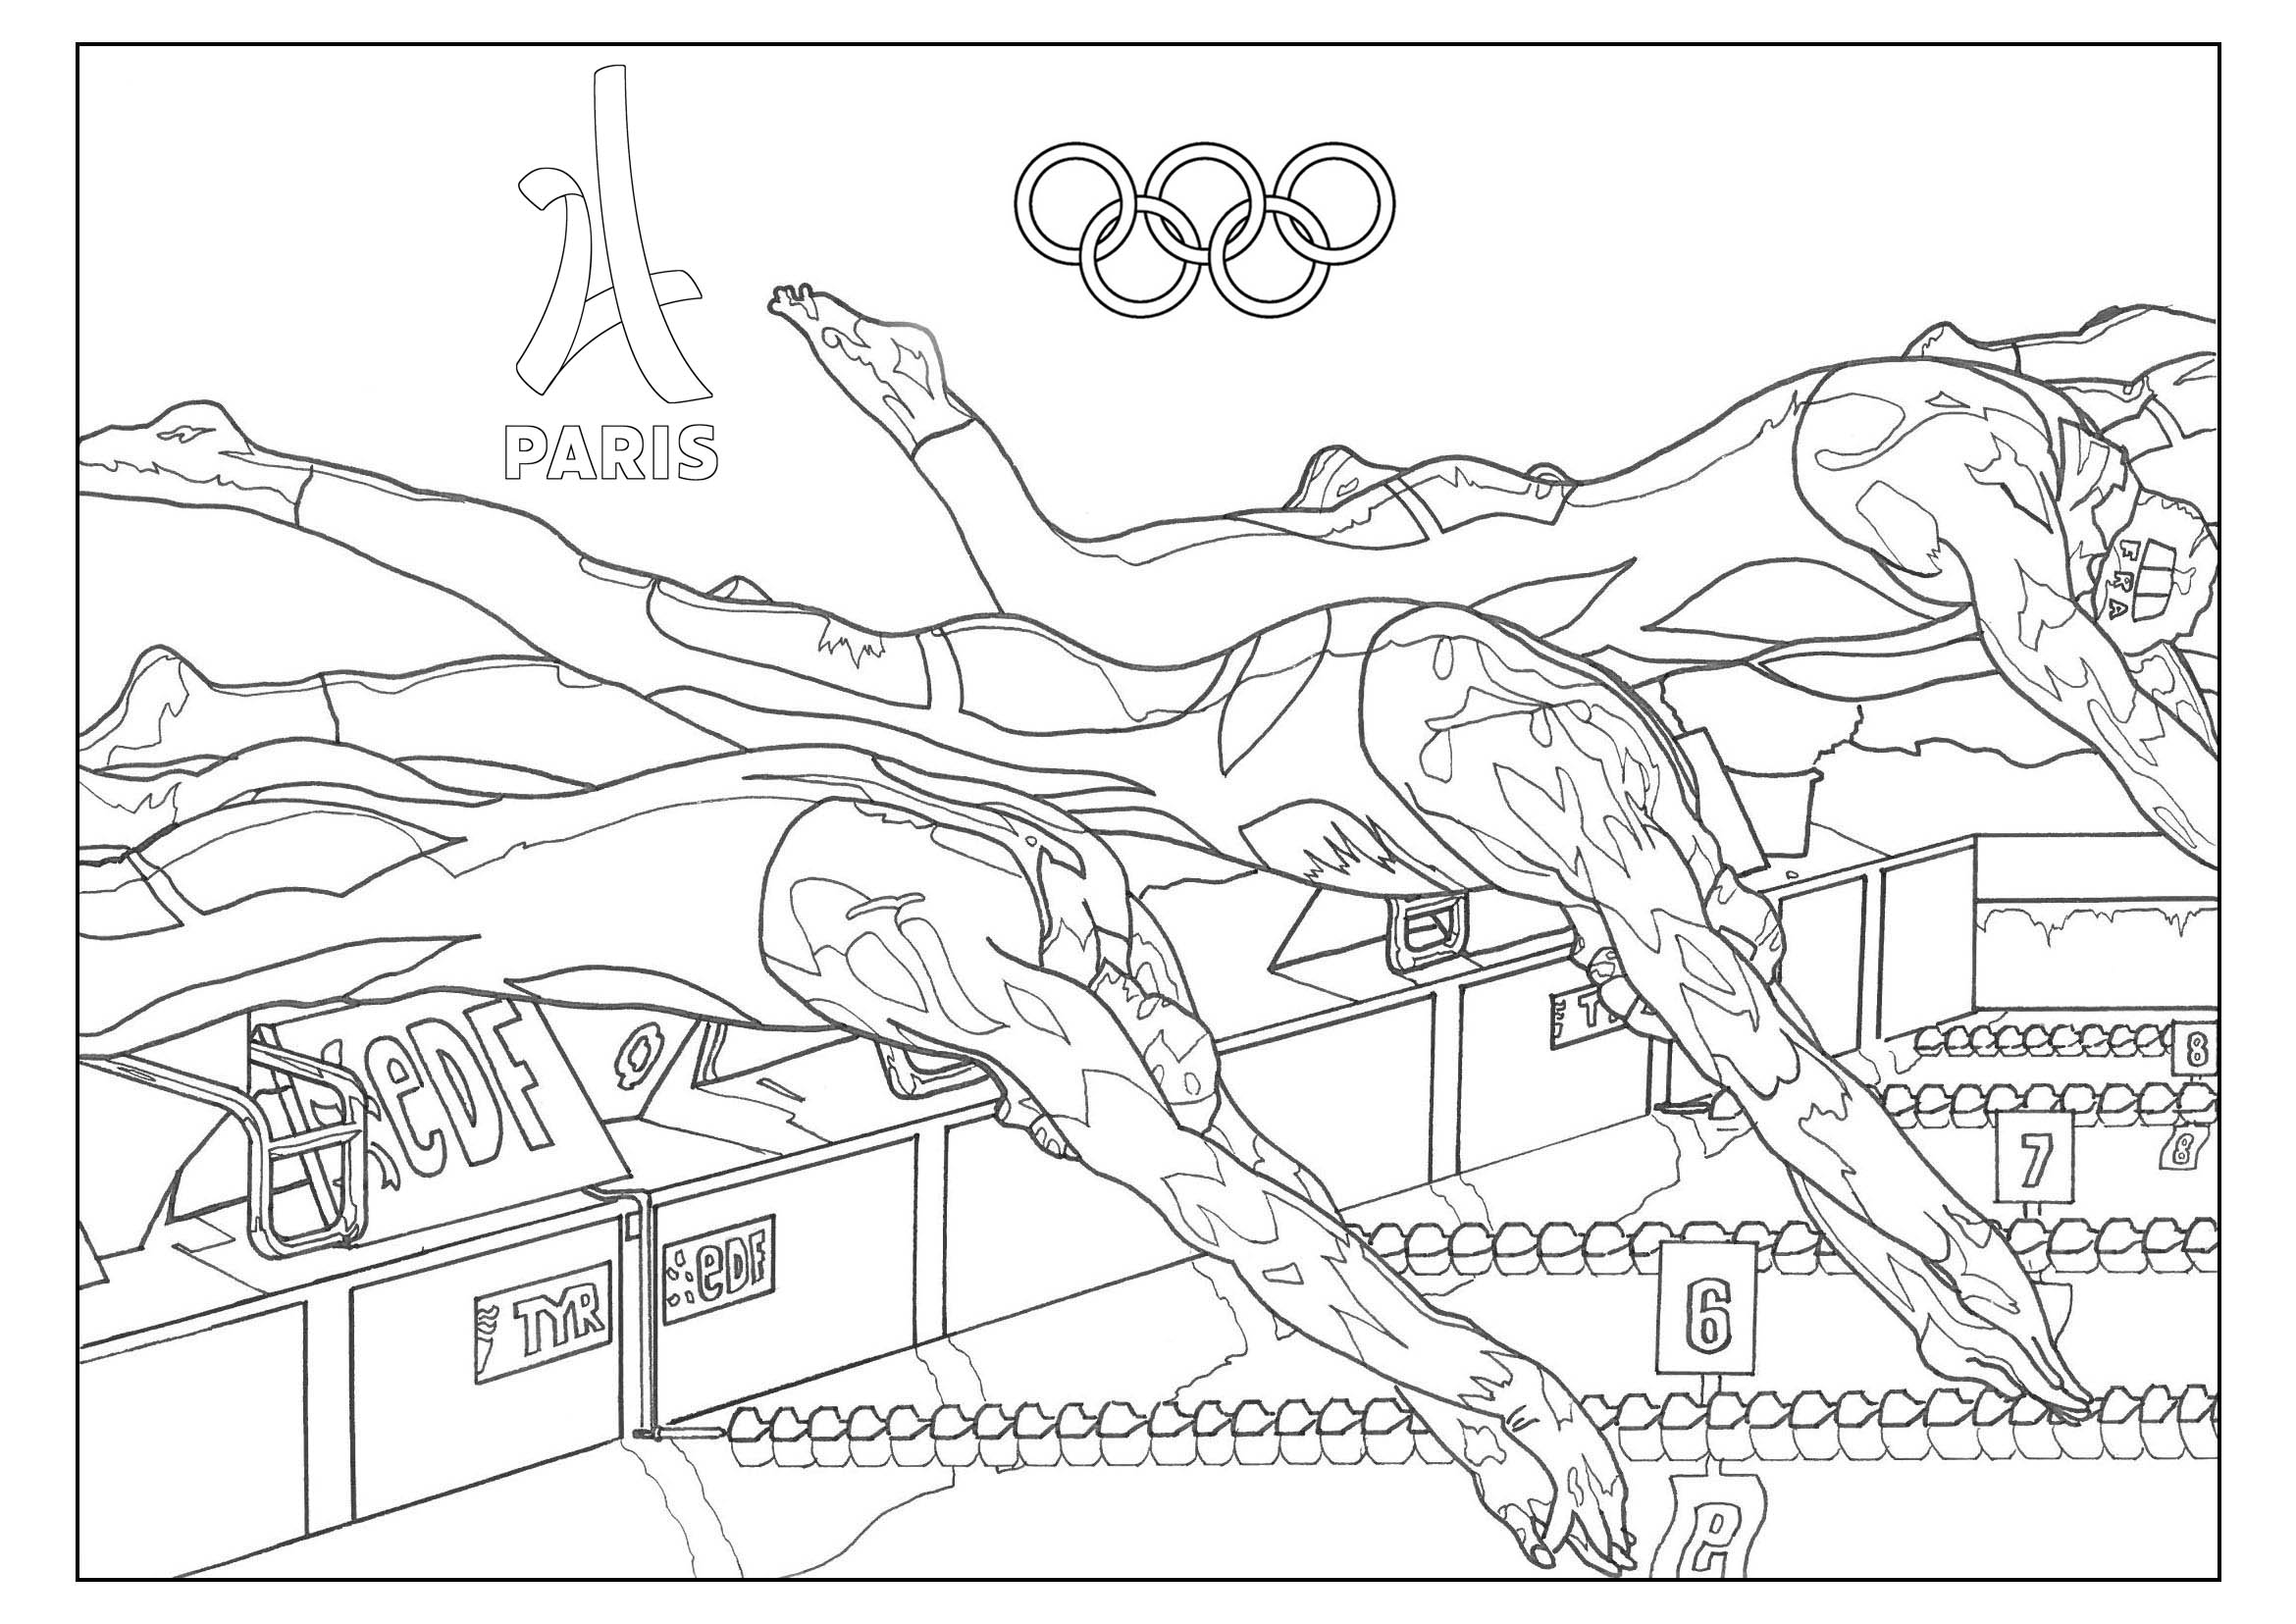 Olympic games swimming paris - 2024 - Olympic (and sport) Adult Coloring  Pages